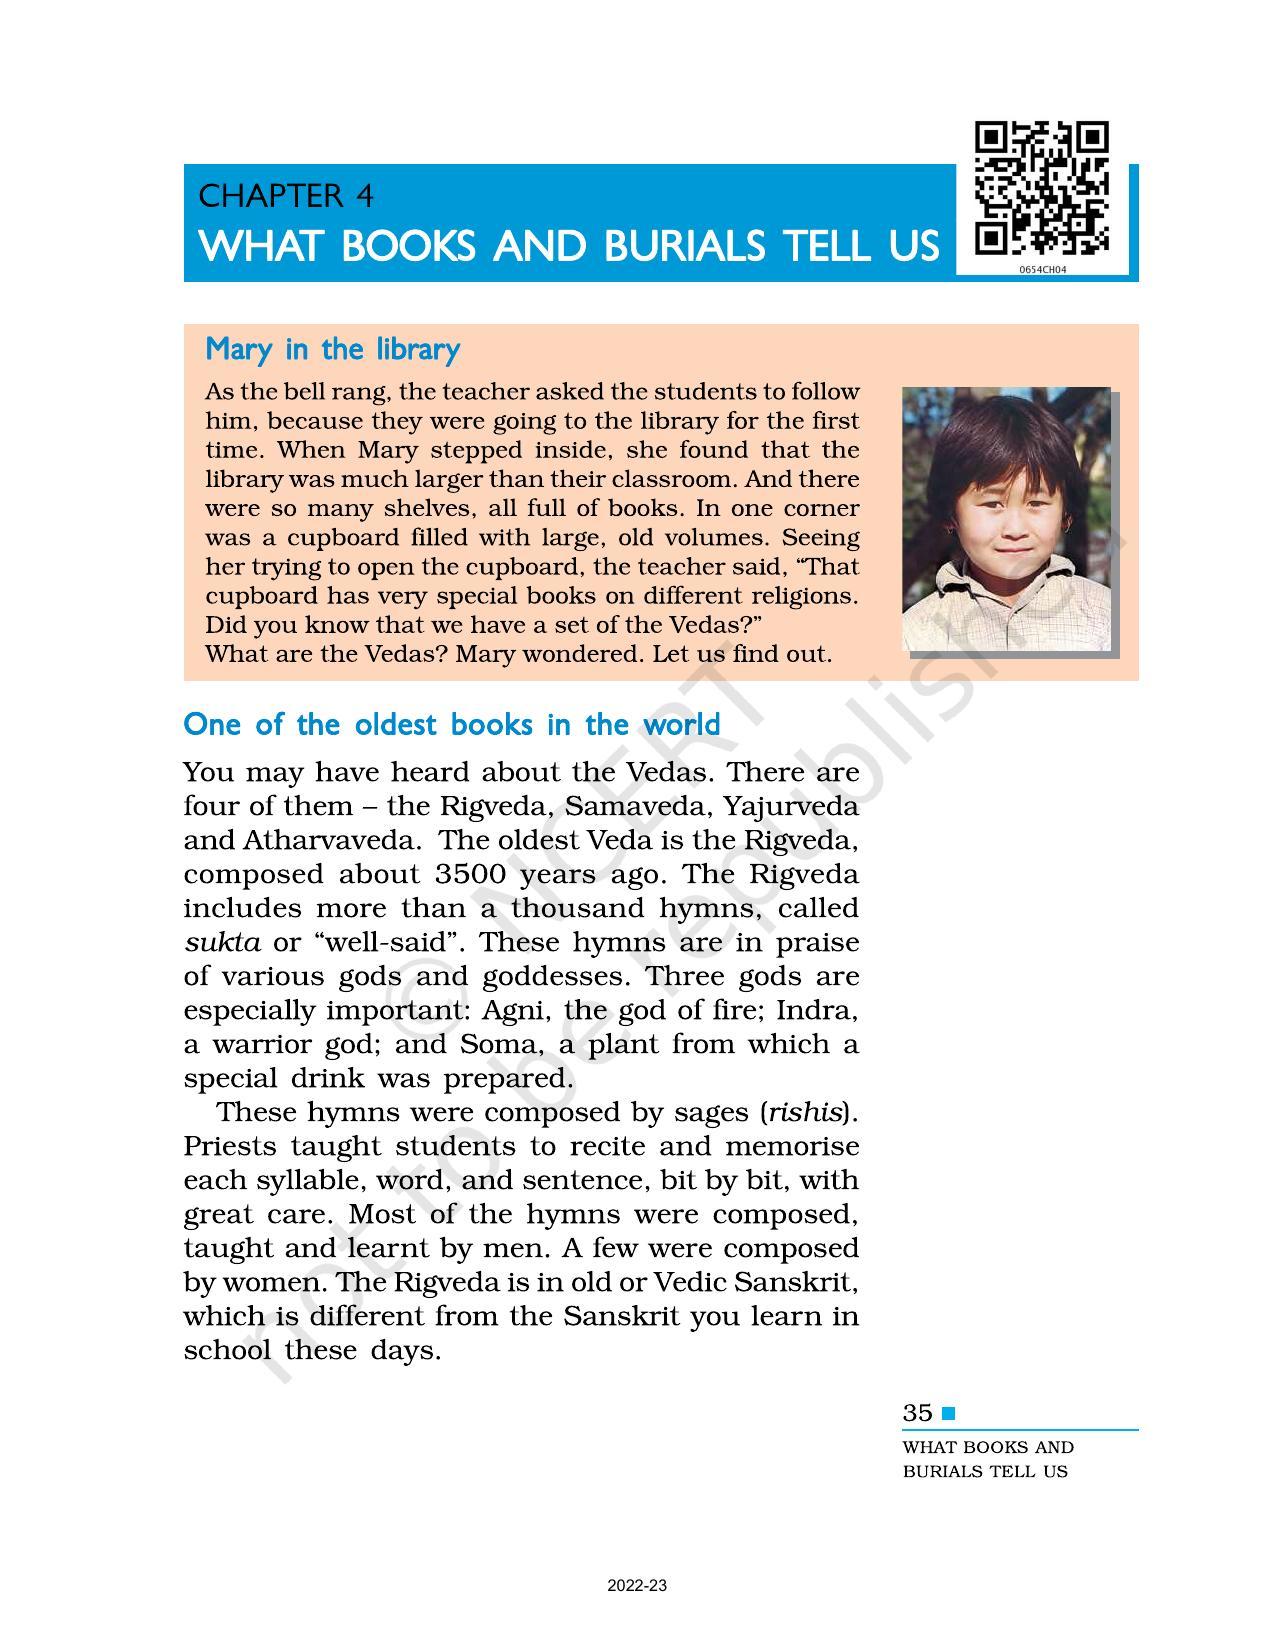 NCERT Book for Class 6 Social Science(History) : Chapter 4-What Books and Burials Tell Us - Page 1